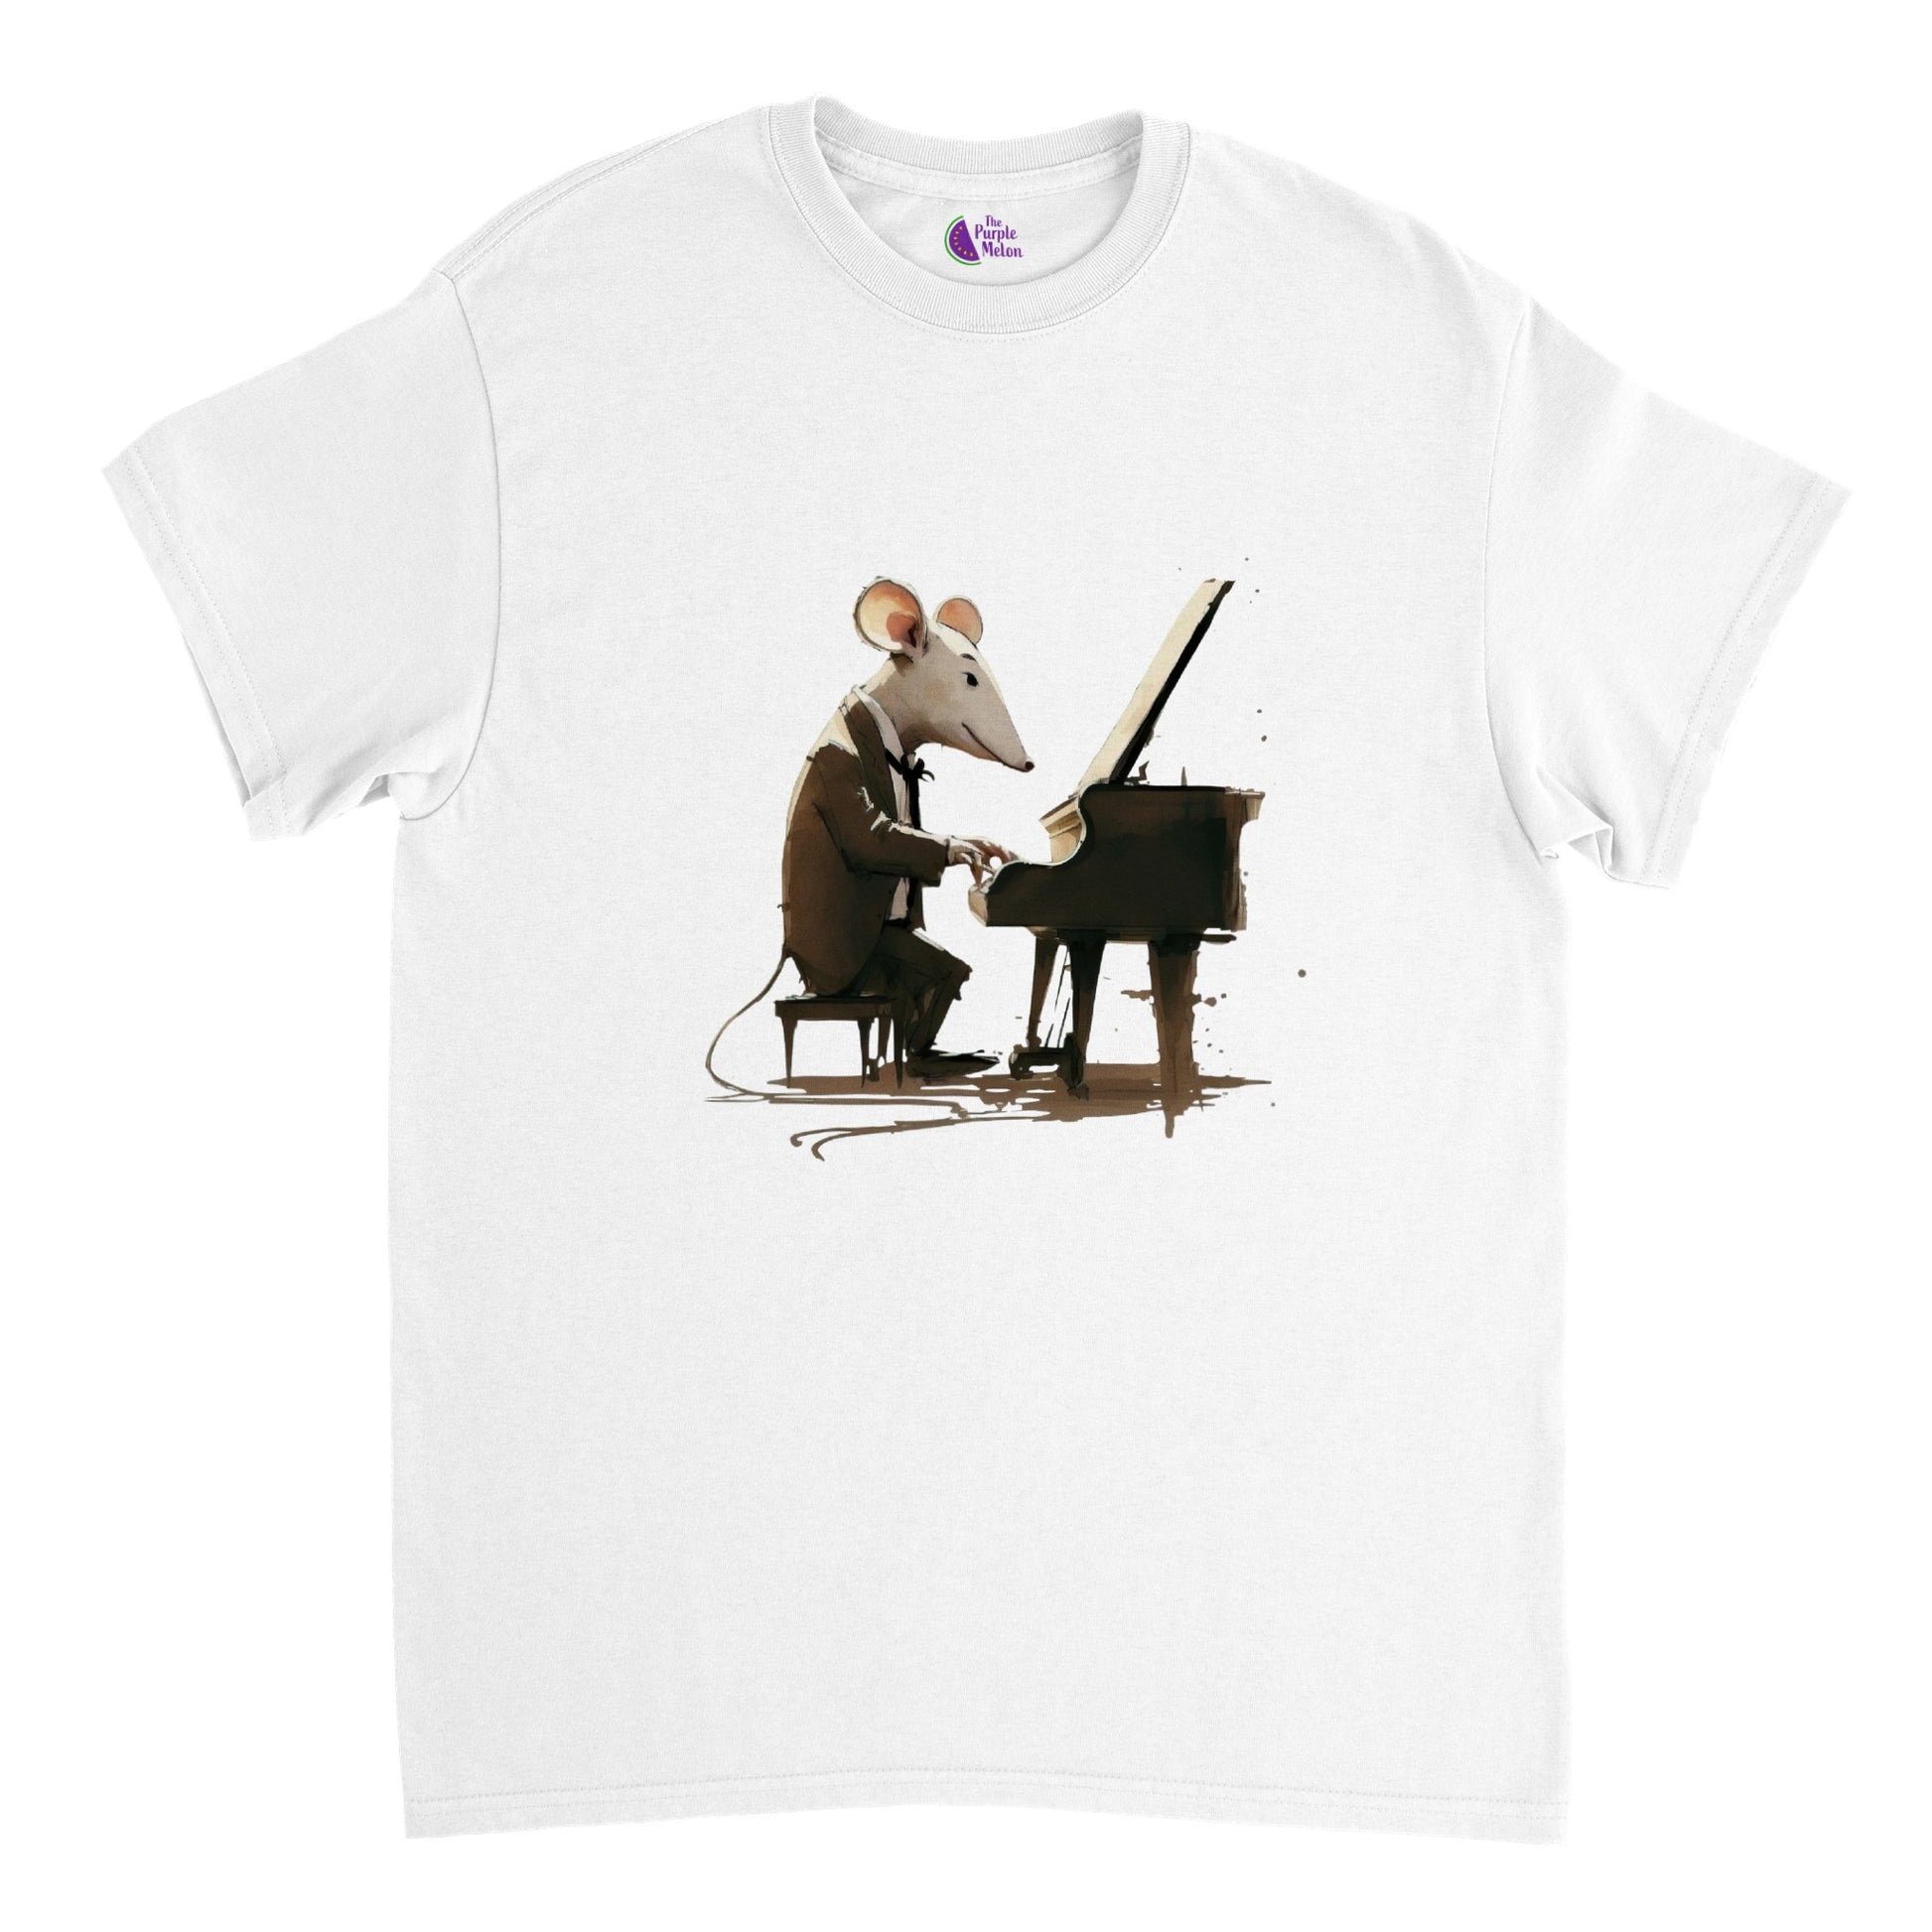 White t-shirt with a mouse playing a piano print